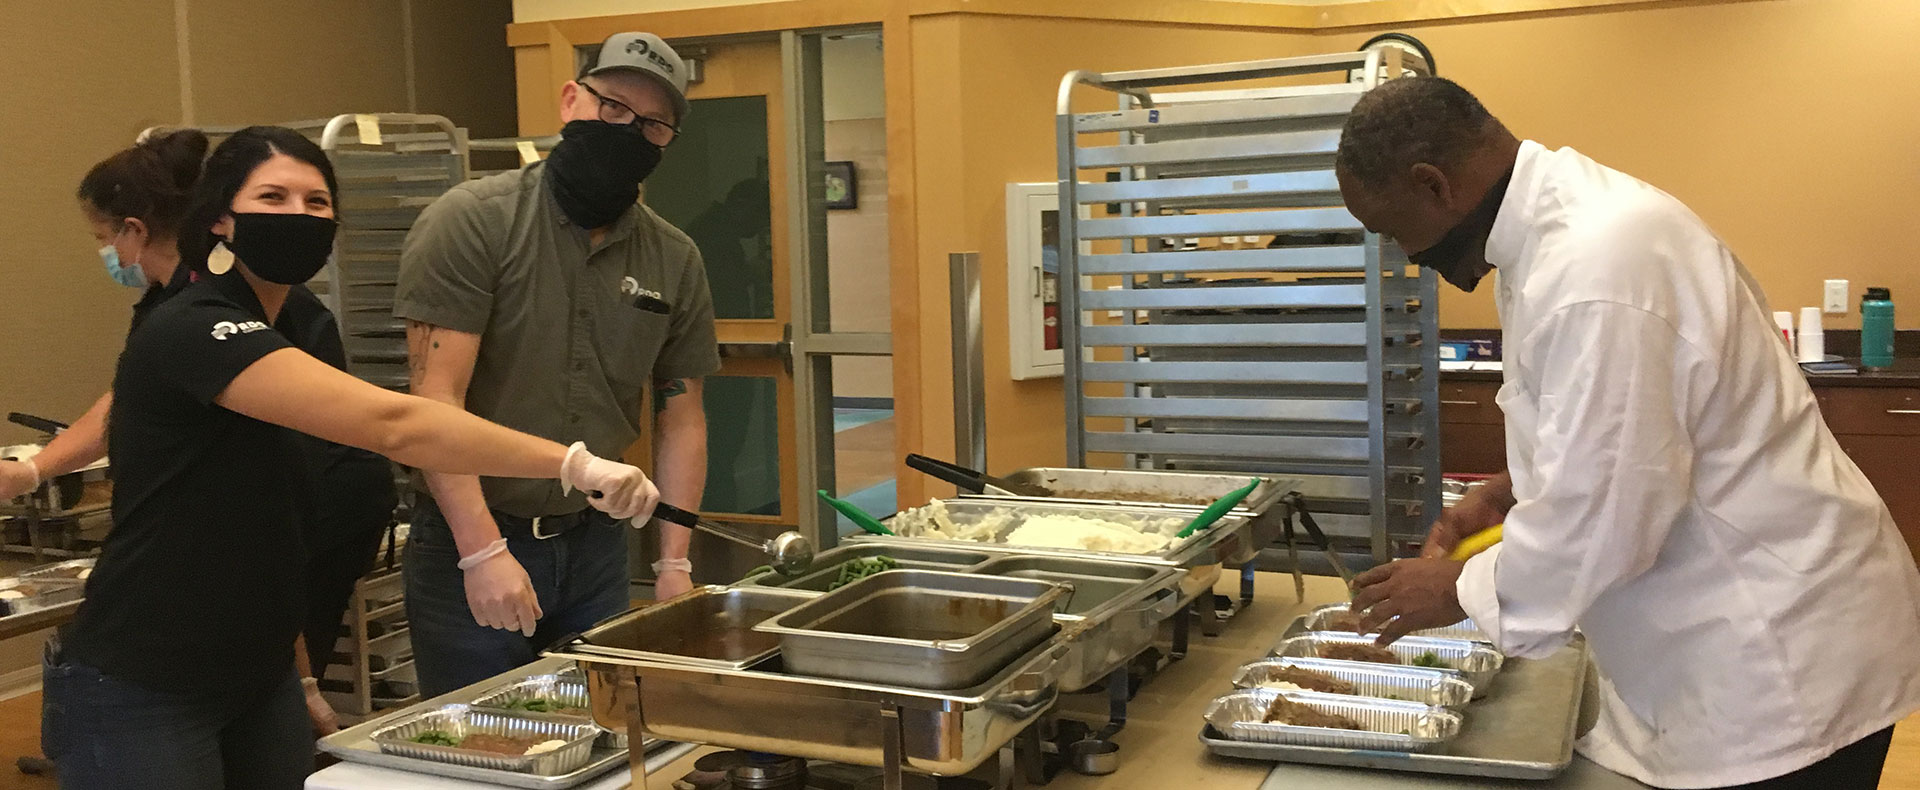 Team Members Provide Meals for Oregon Wildfire Victims